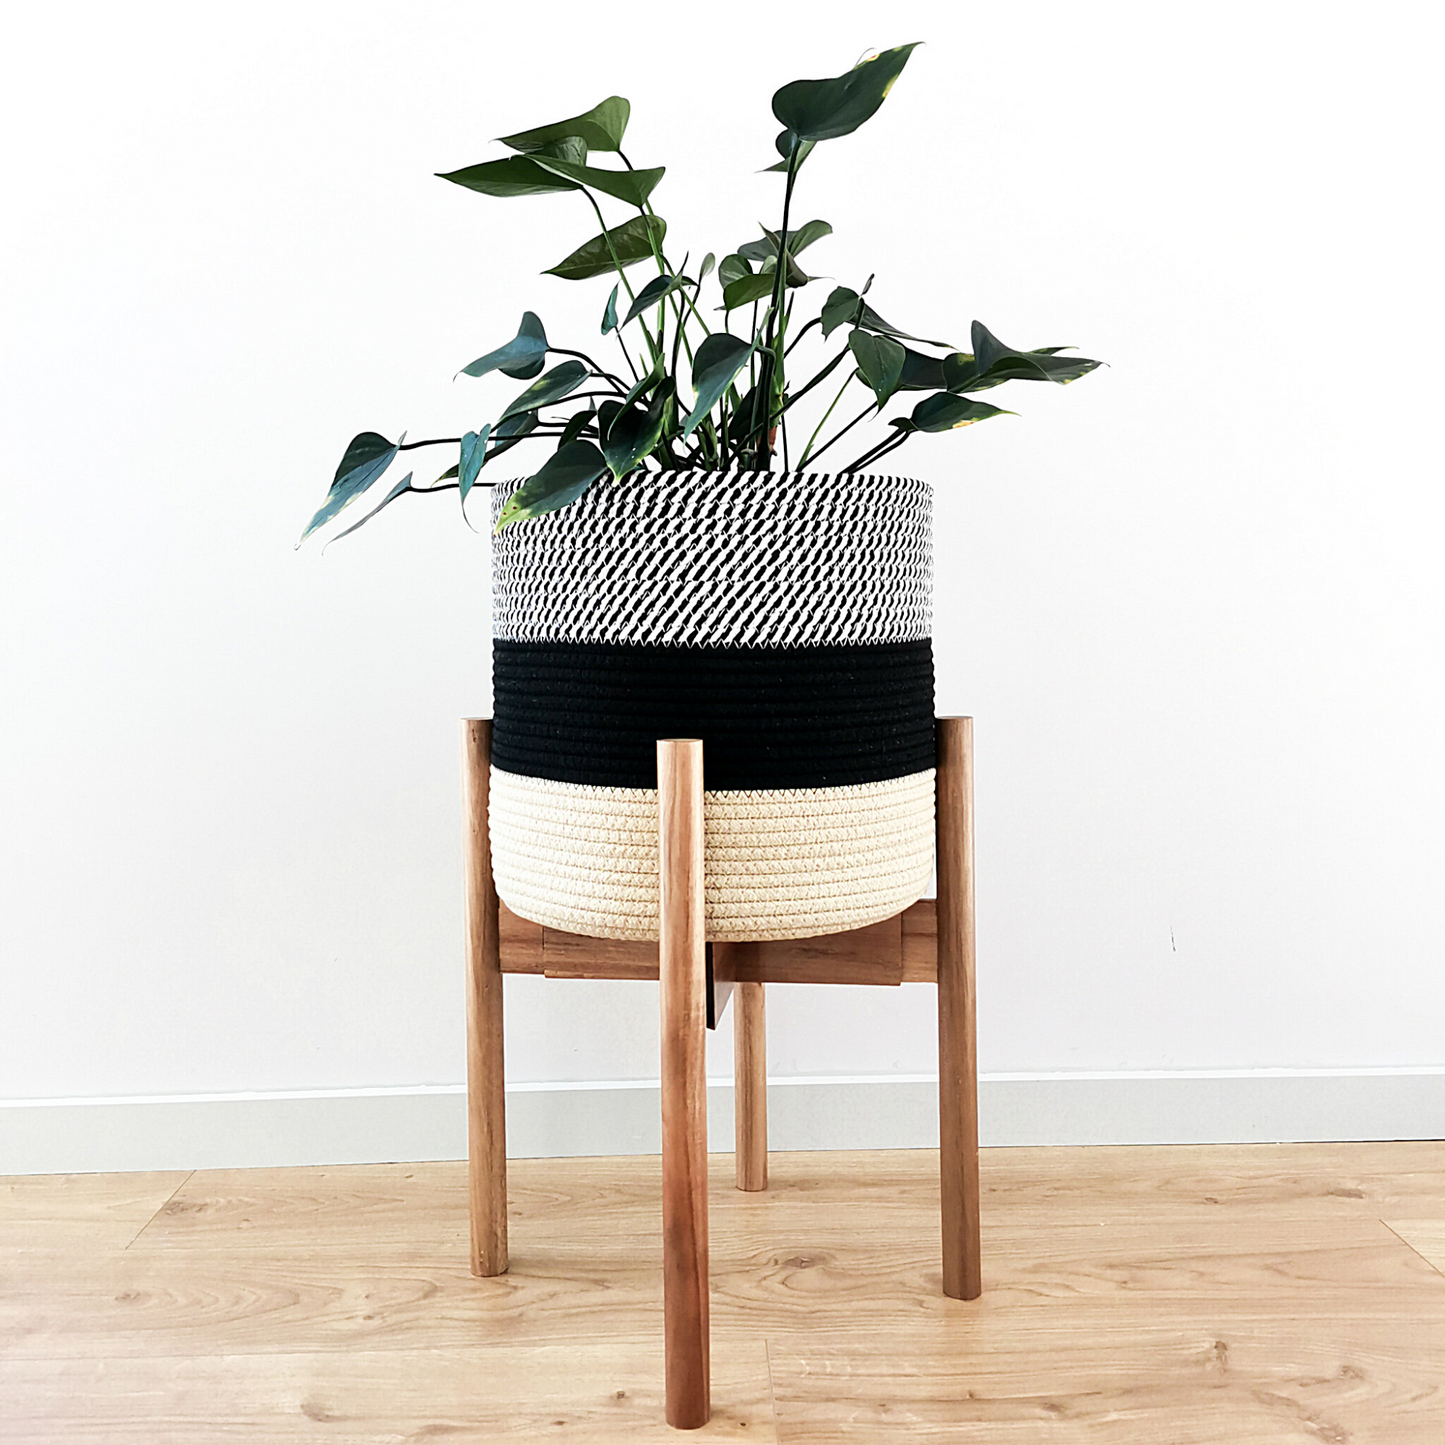 Elevate your plants and decor with the sleek design of our minimalist plant stand. This sturdy, yet lightweight modern plant stand is handcrafted from acacia and bamboo wood that complements contemporary, farmhouse, rustic, mid-century modern interirors. 